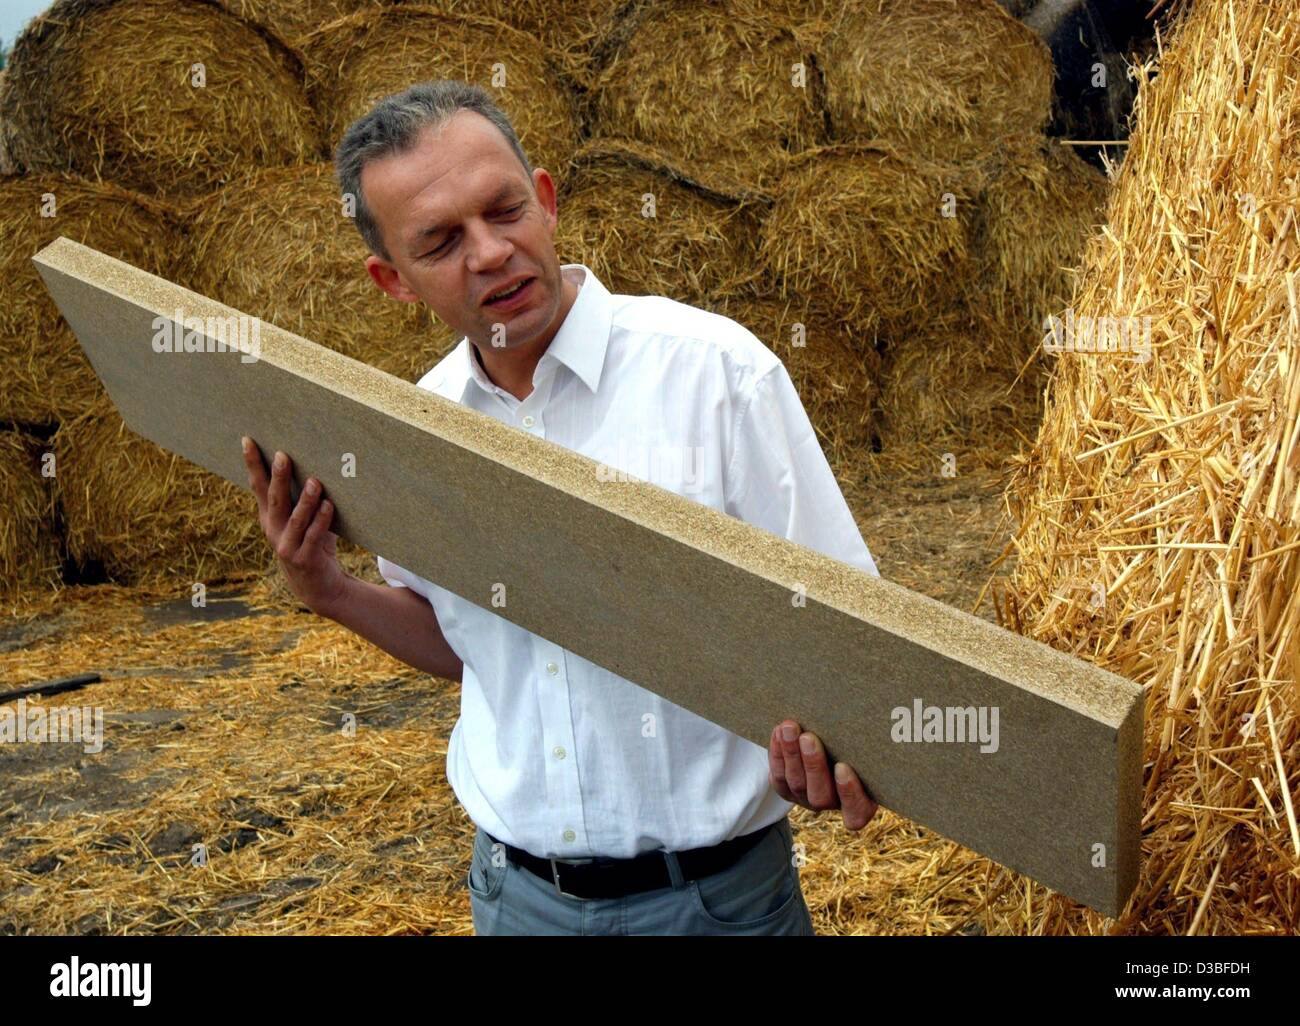 (dpa) - Matthias Mielke of Stropoly GmbH is showing a 40 millimetre strong plate made from pressed straw, Guestrow, Germany, 19 June 2003. Stropoly officially started producing the innovative building material on 20 June 2003. 30,000 tons of straw per year and binding agents are made into plates for Stock Photo